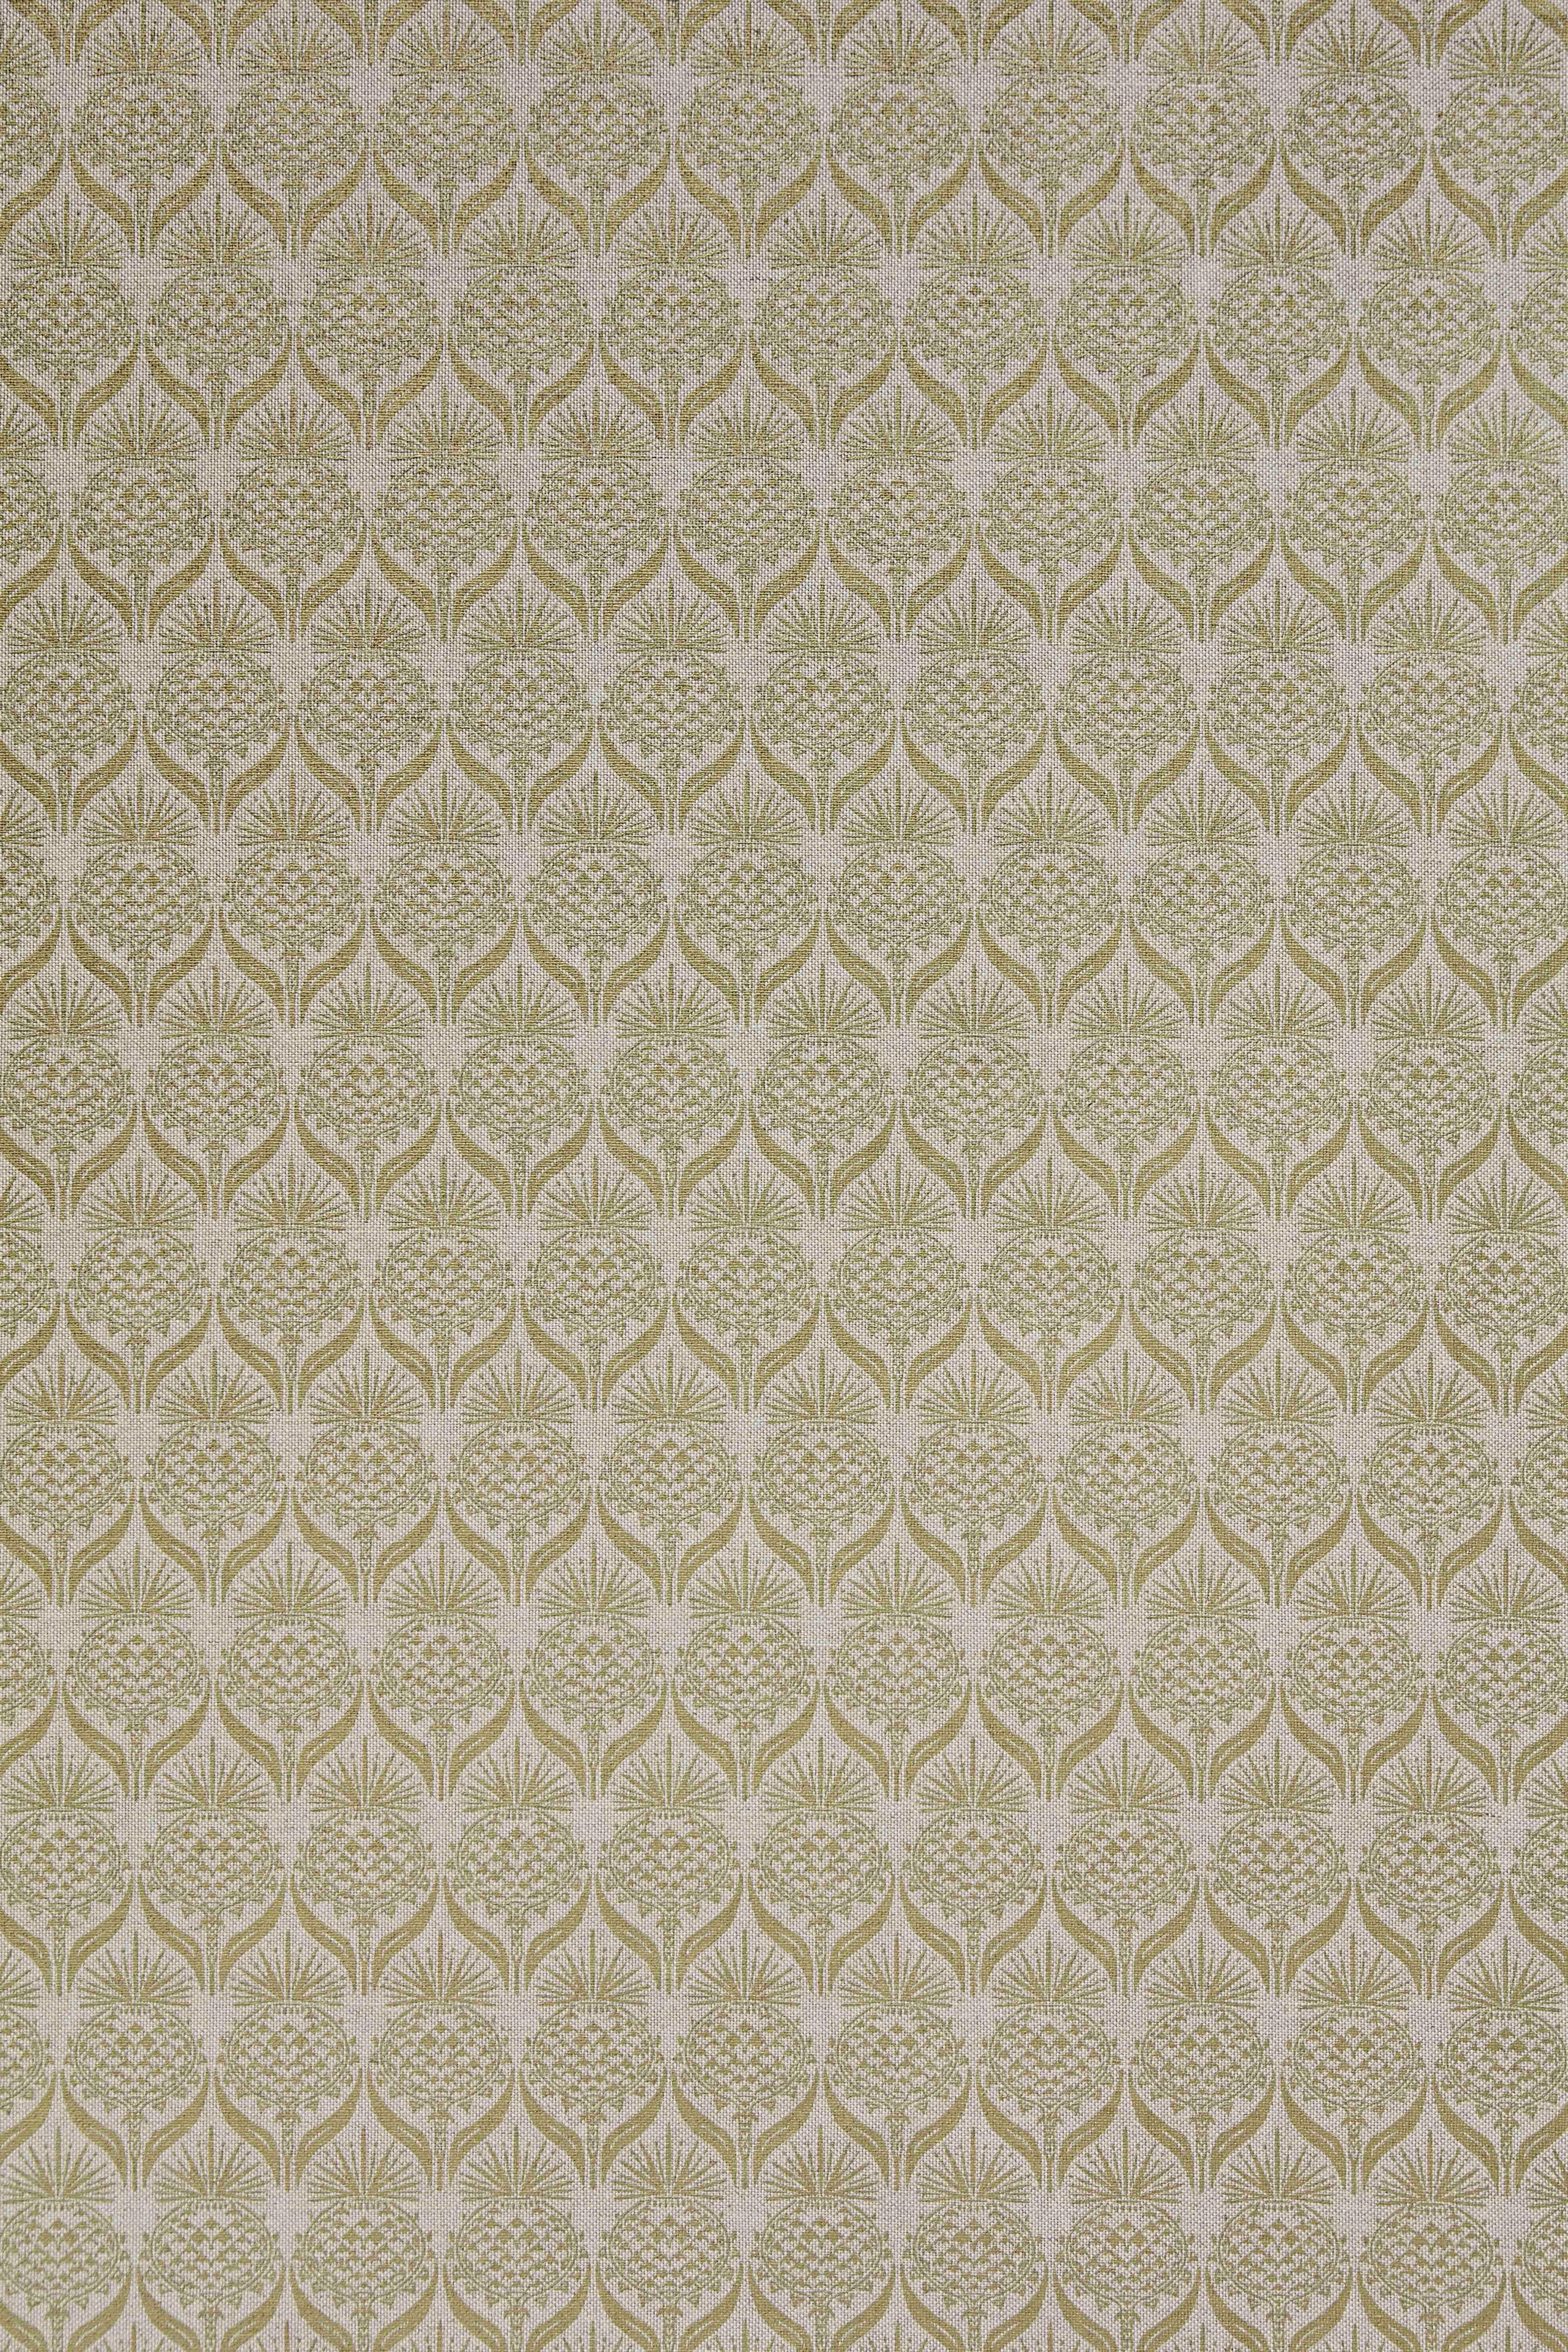 Color: Gold (also available in Teal and Spring Green)
Trim width: 142cm / 55.90 inches
Pattern repeat: Straight Match
Match length: 45.7cm / 18 inches
Composition: 58% linen 42% cotton
Usage: General domestic upholstery

Sold per